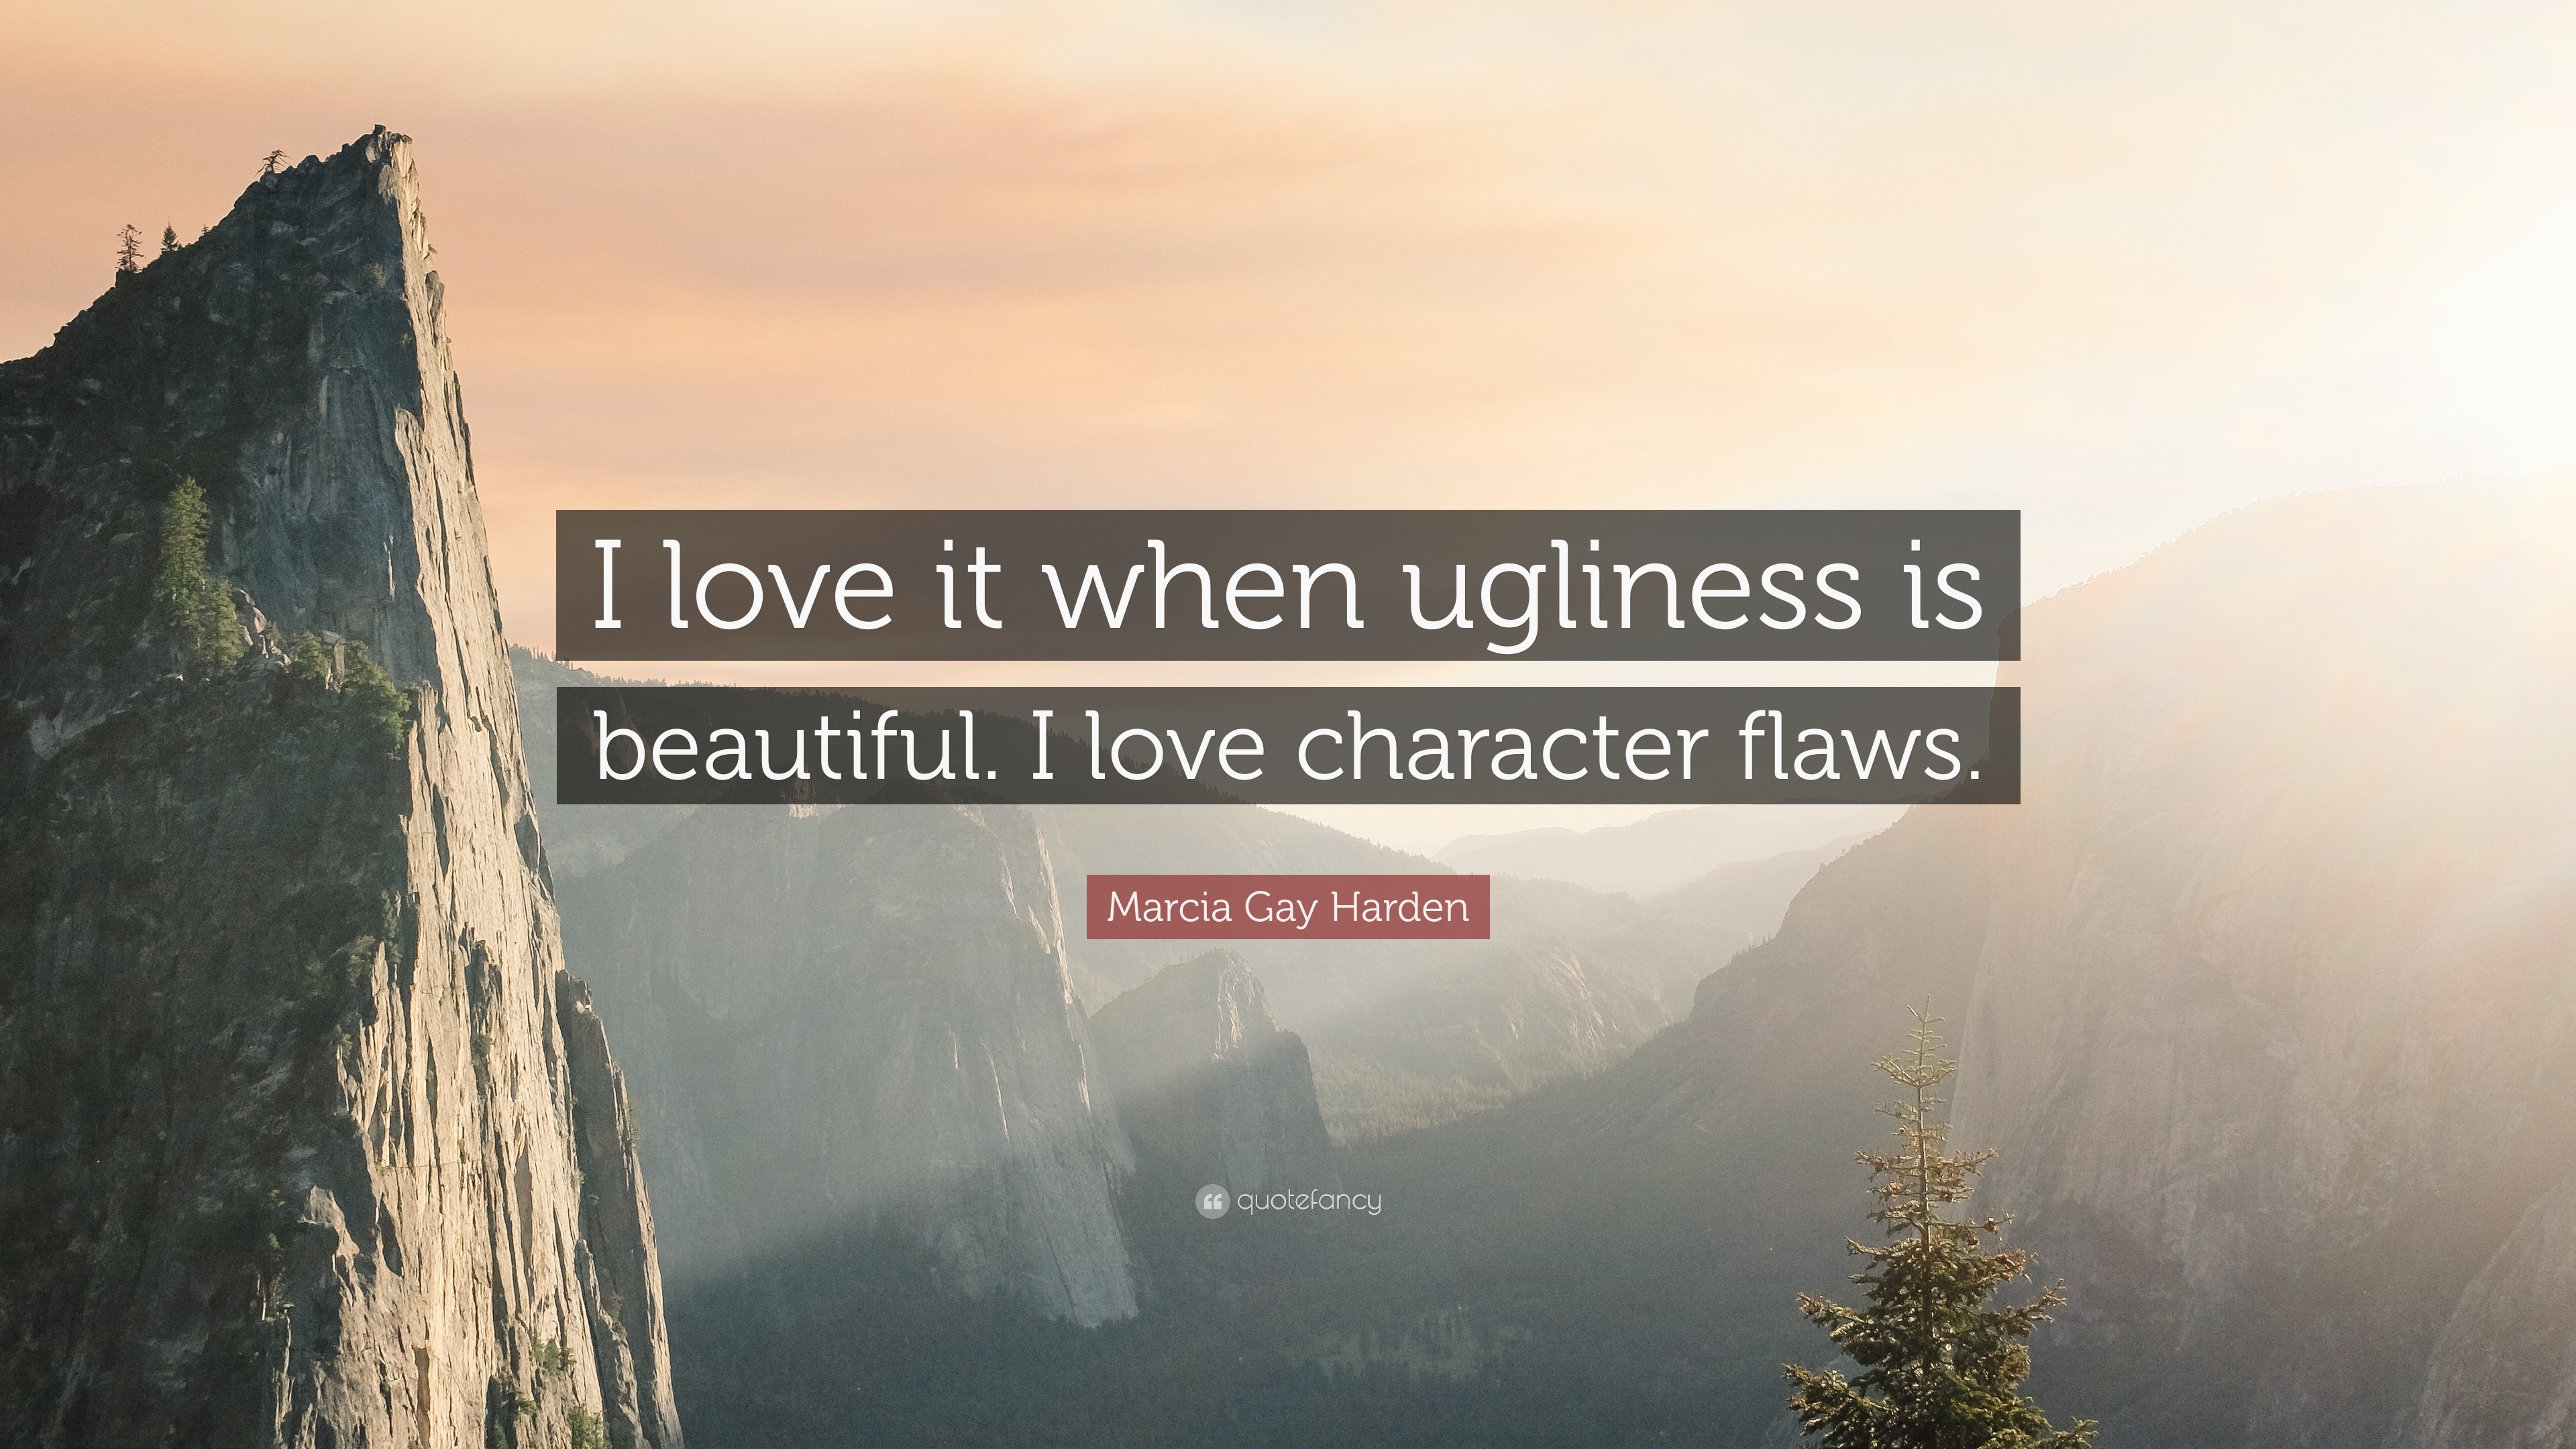 Marcia Gay Harden Quote “I love it when ugliness is beautiful I love